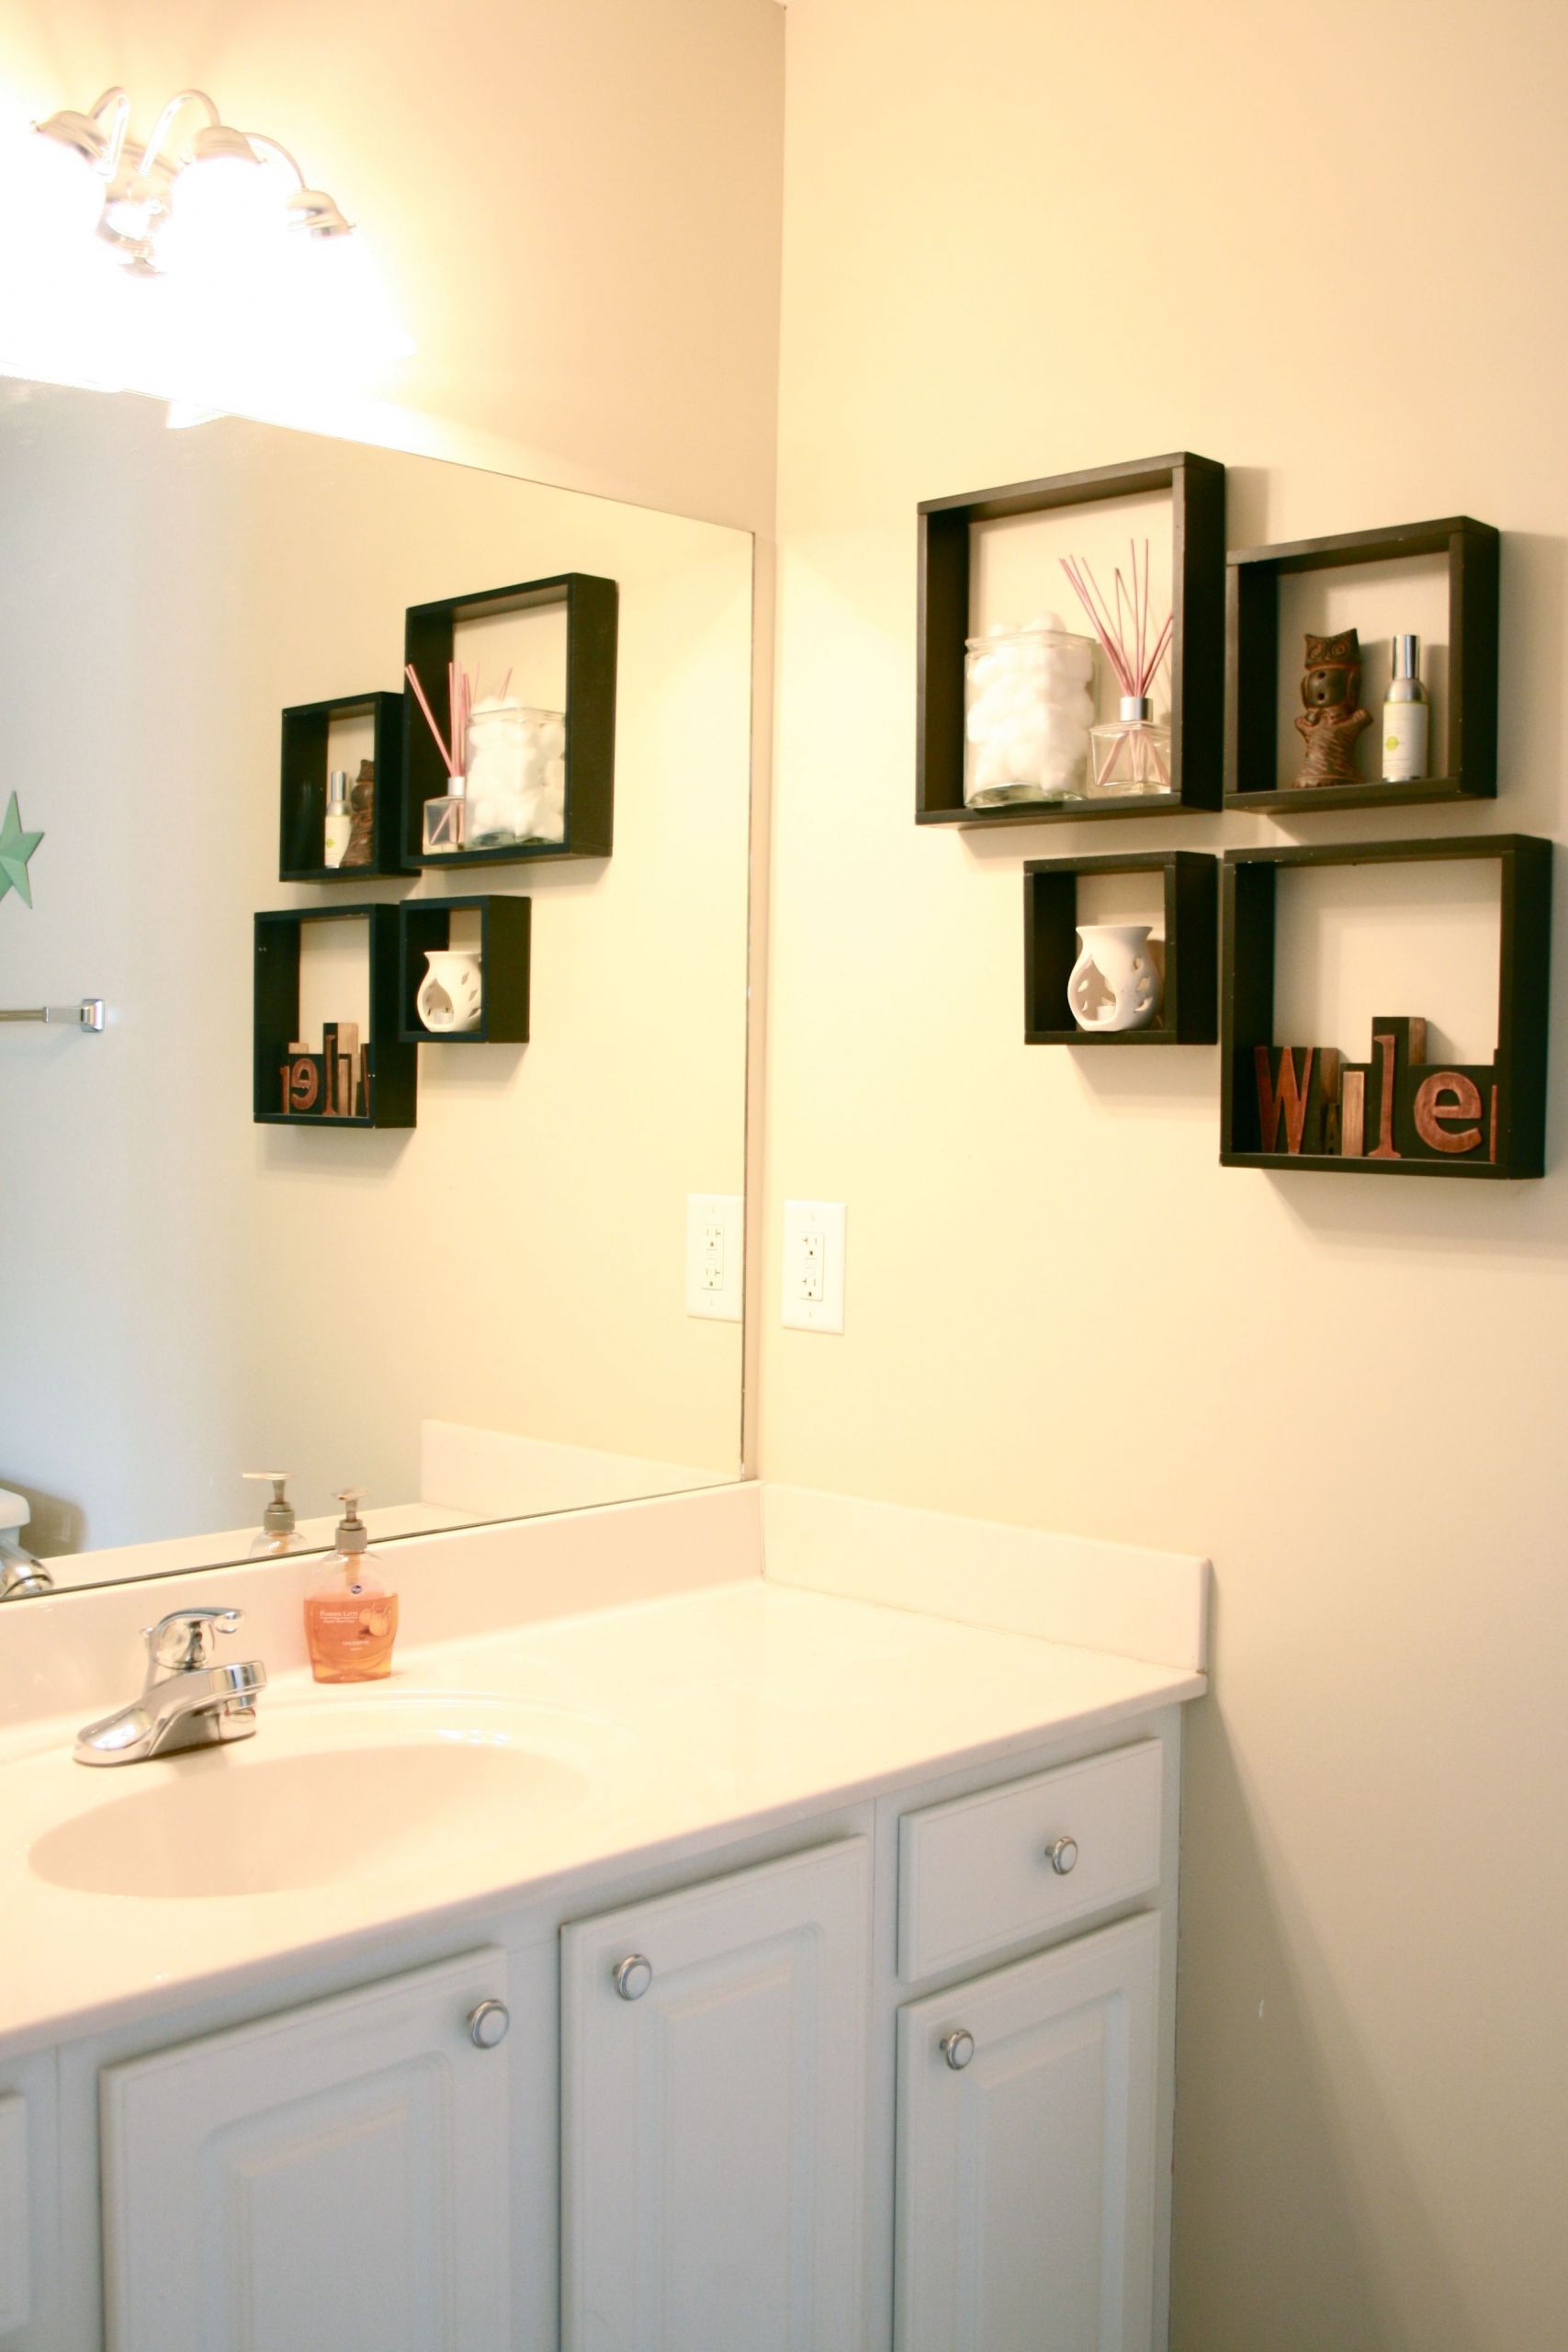 Wall Pictures For Bathroom
 Chic Bathroom Wall Shelving Ideas for Cleaner Bathroom